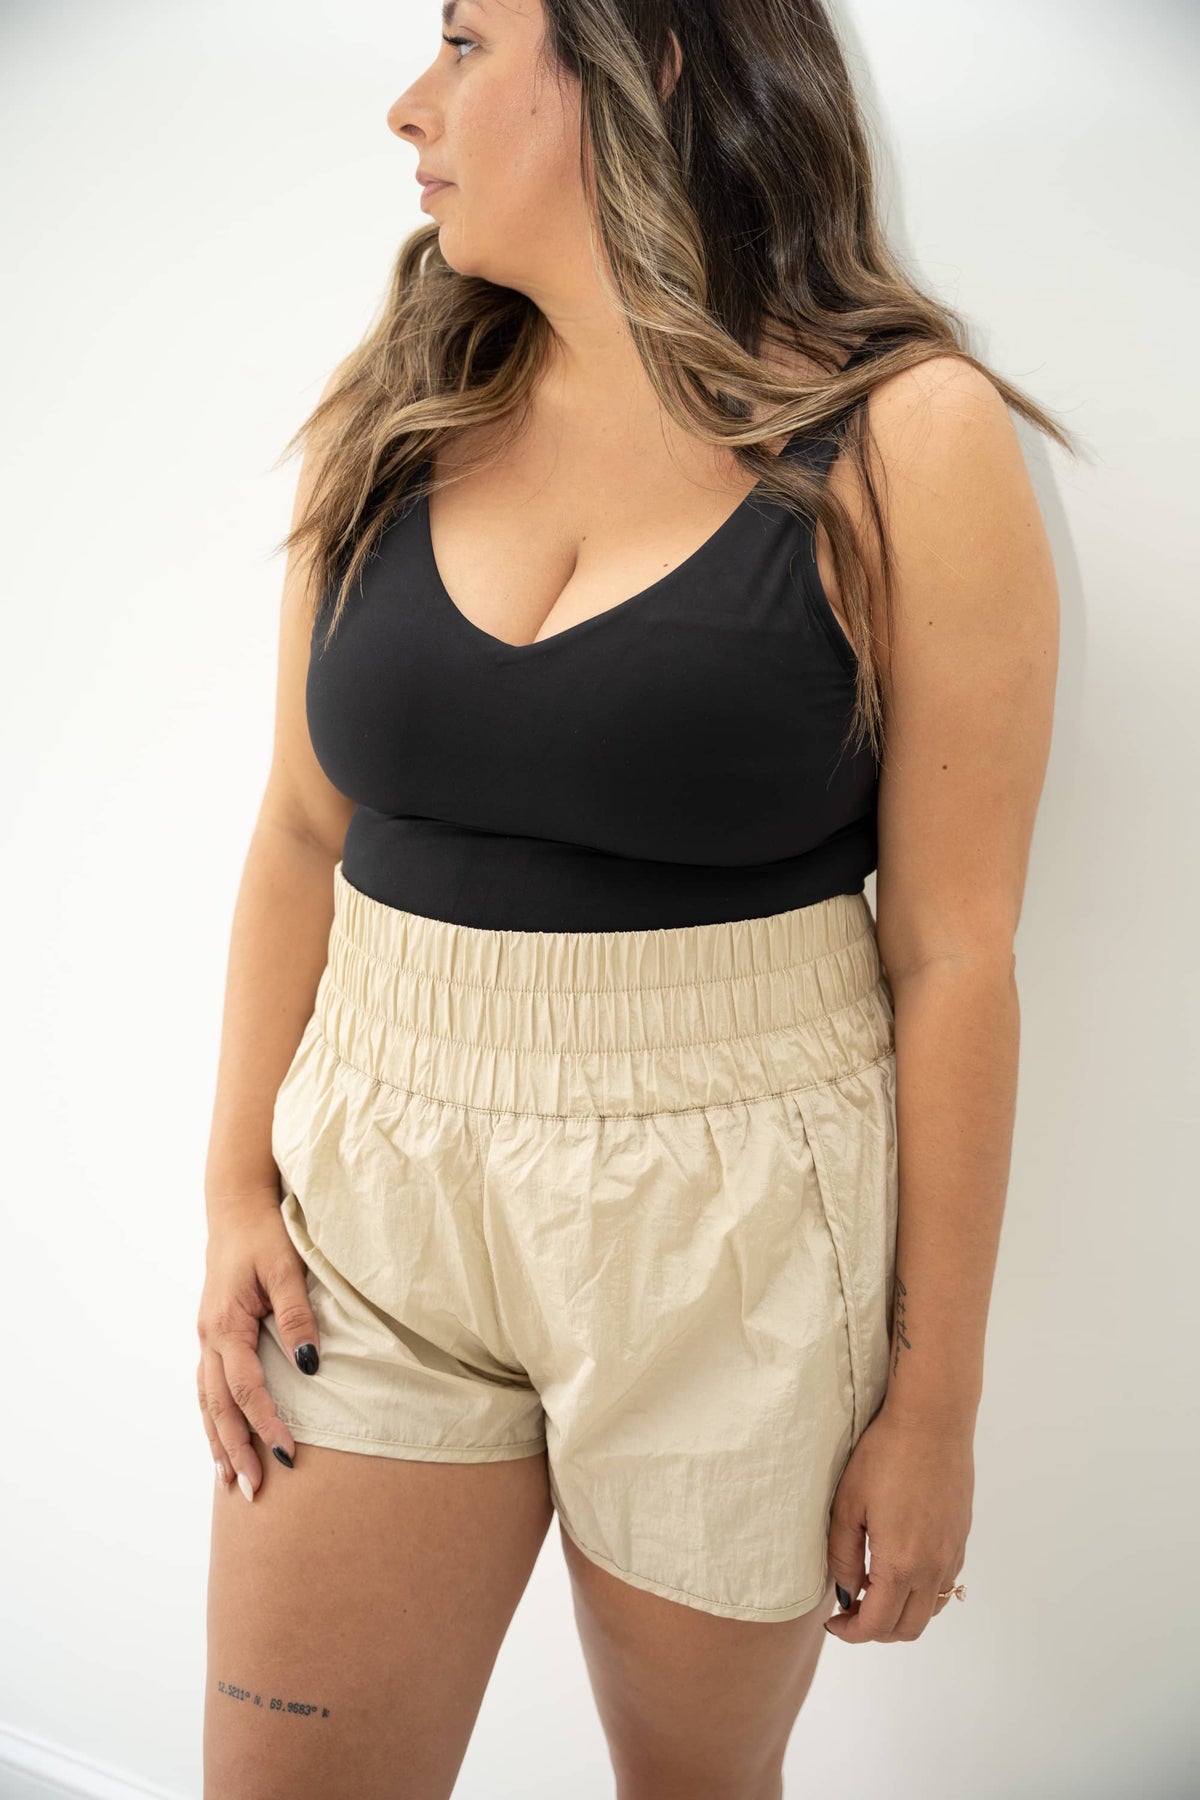 Gold SHIMMER shorts with buttery-soft inner lining.